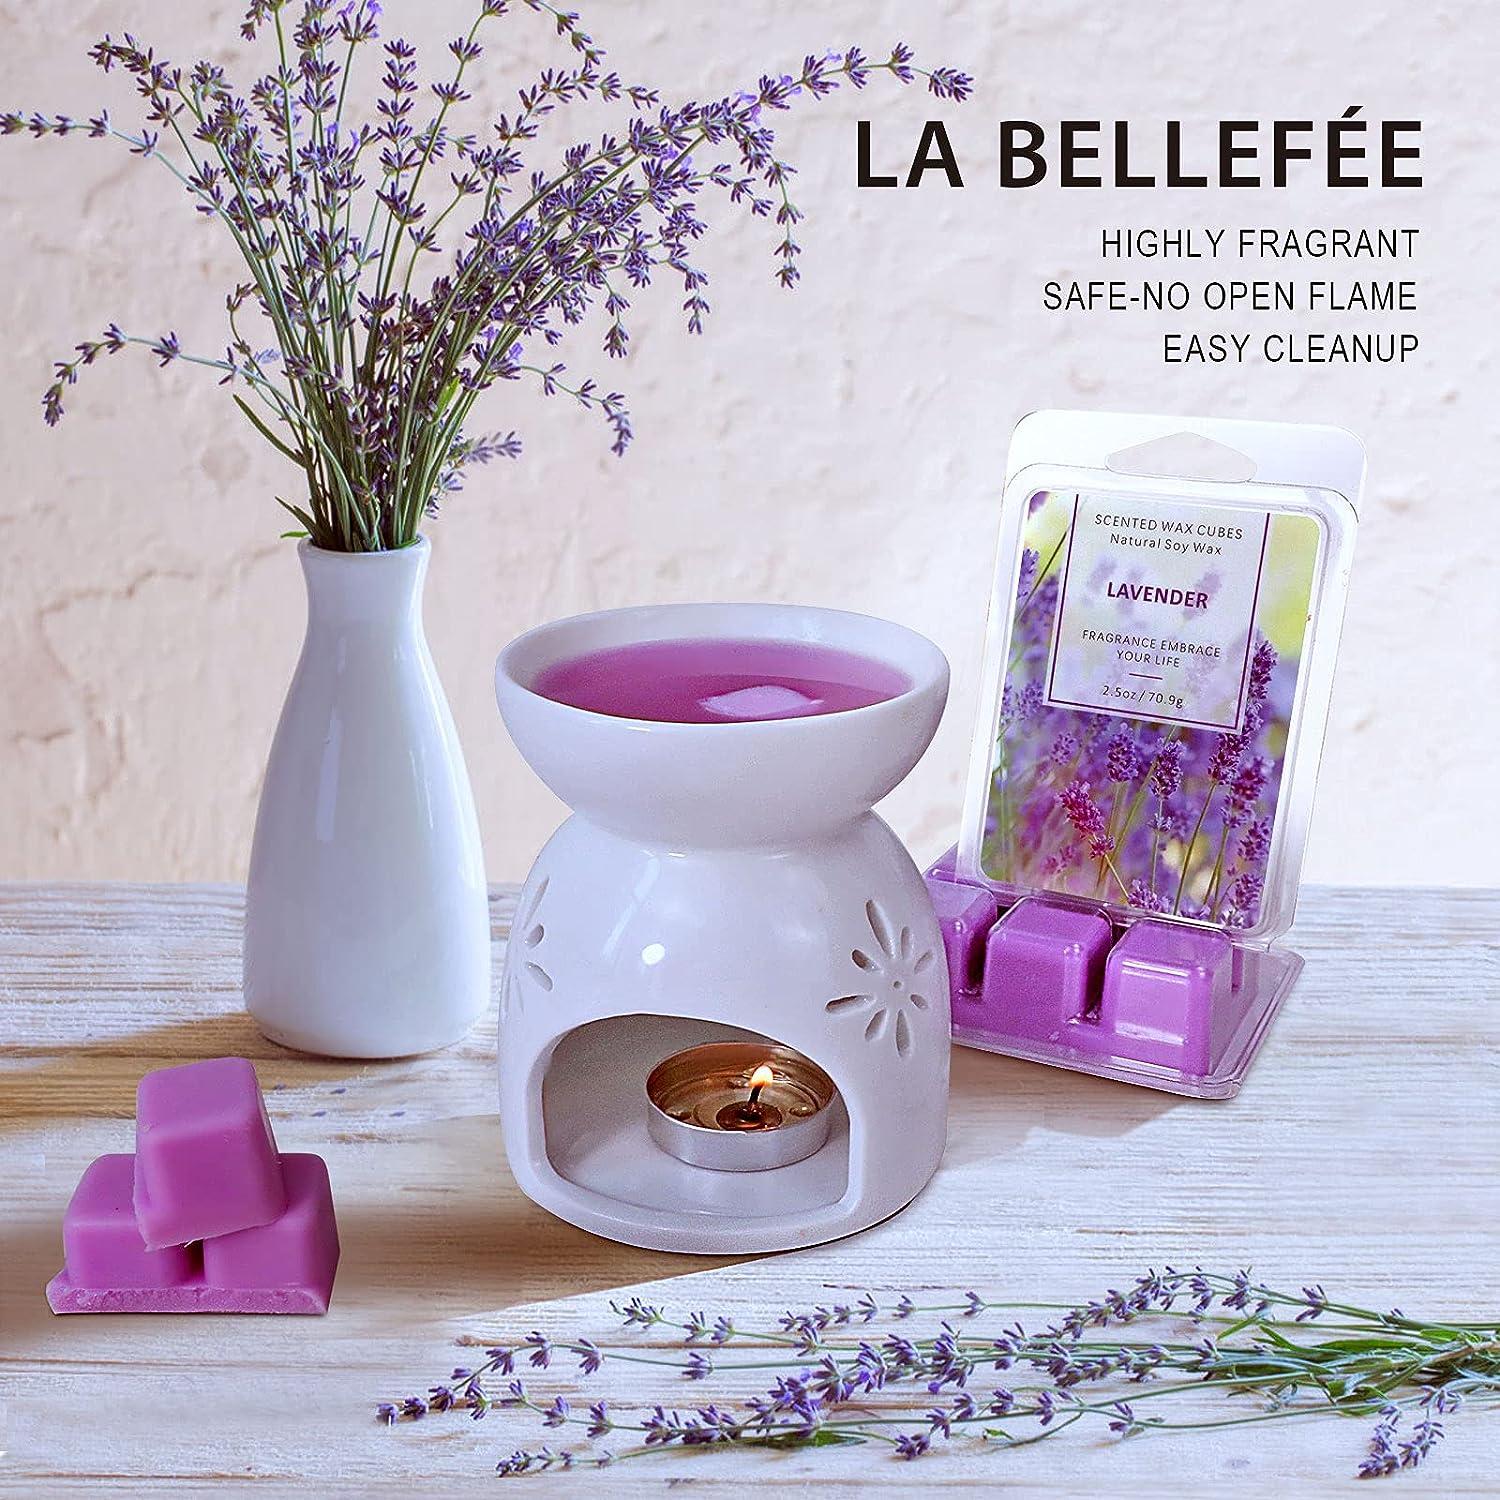  LA BELLEFÉE Wax Melts Wax Cubes, Natural Soy Wax Cubes Candle  Melts, Scented Wax Melts for Wax Warmer Mothers Day Gifts Decor, Floral of  Rose, Lavender, Jasmine, Cherry for Spa Relaxing